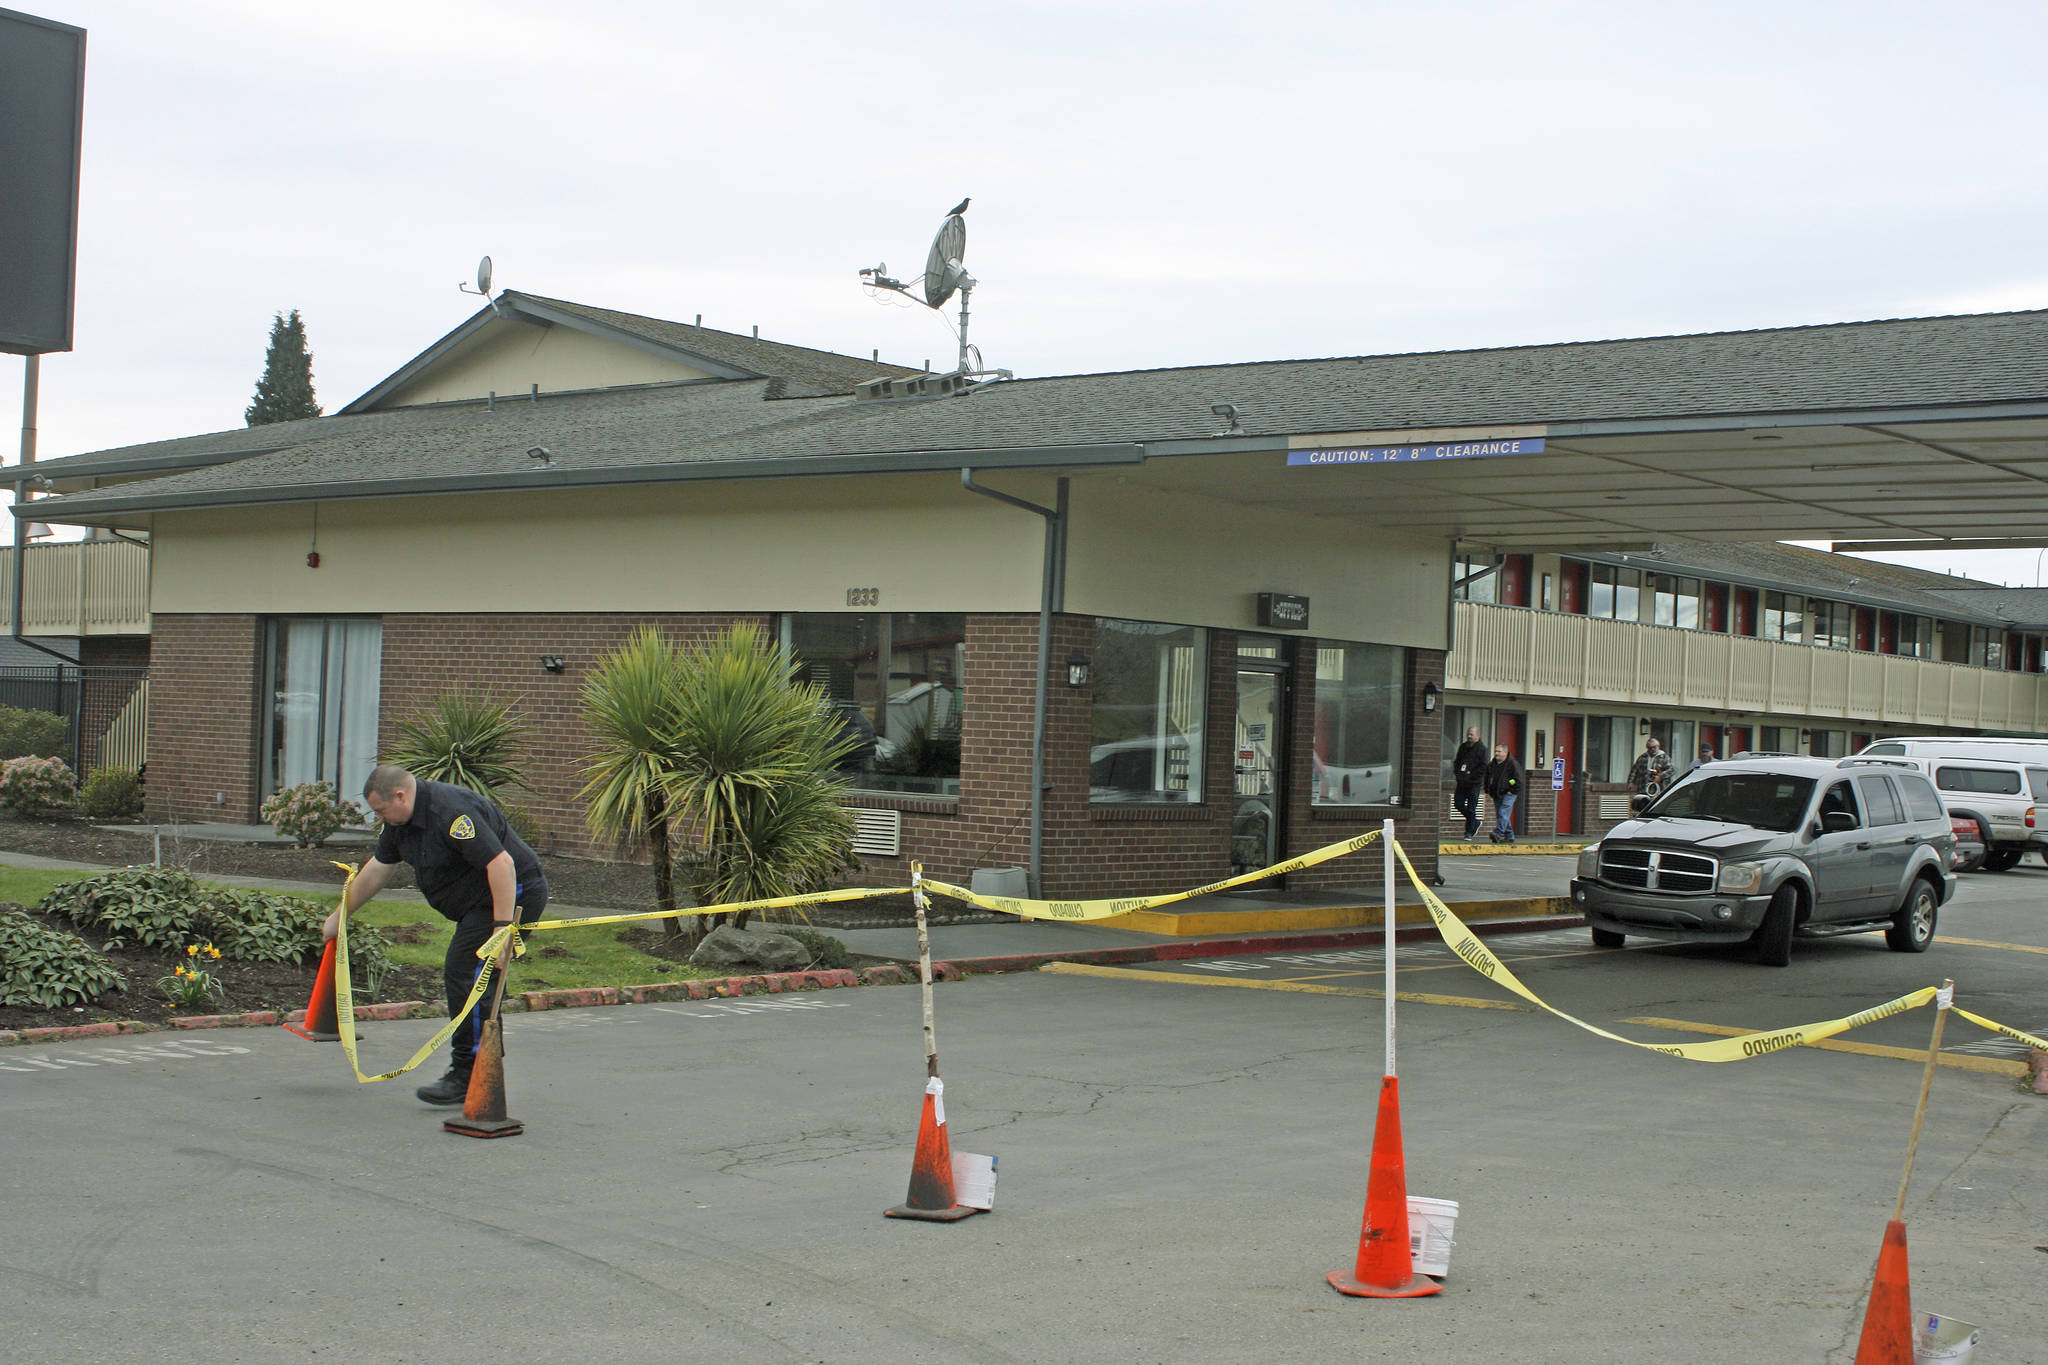 A security guard positions cones as he stands watch in front of the Econo Lodge-turned-coronavirus-quarantine site on Central Avenue North on Tuesday. King County personnel were on site preparing the motel’s transformation into an isolation/quarantine center. MARK KLAAS, Kent Reporter